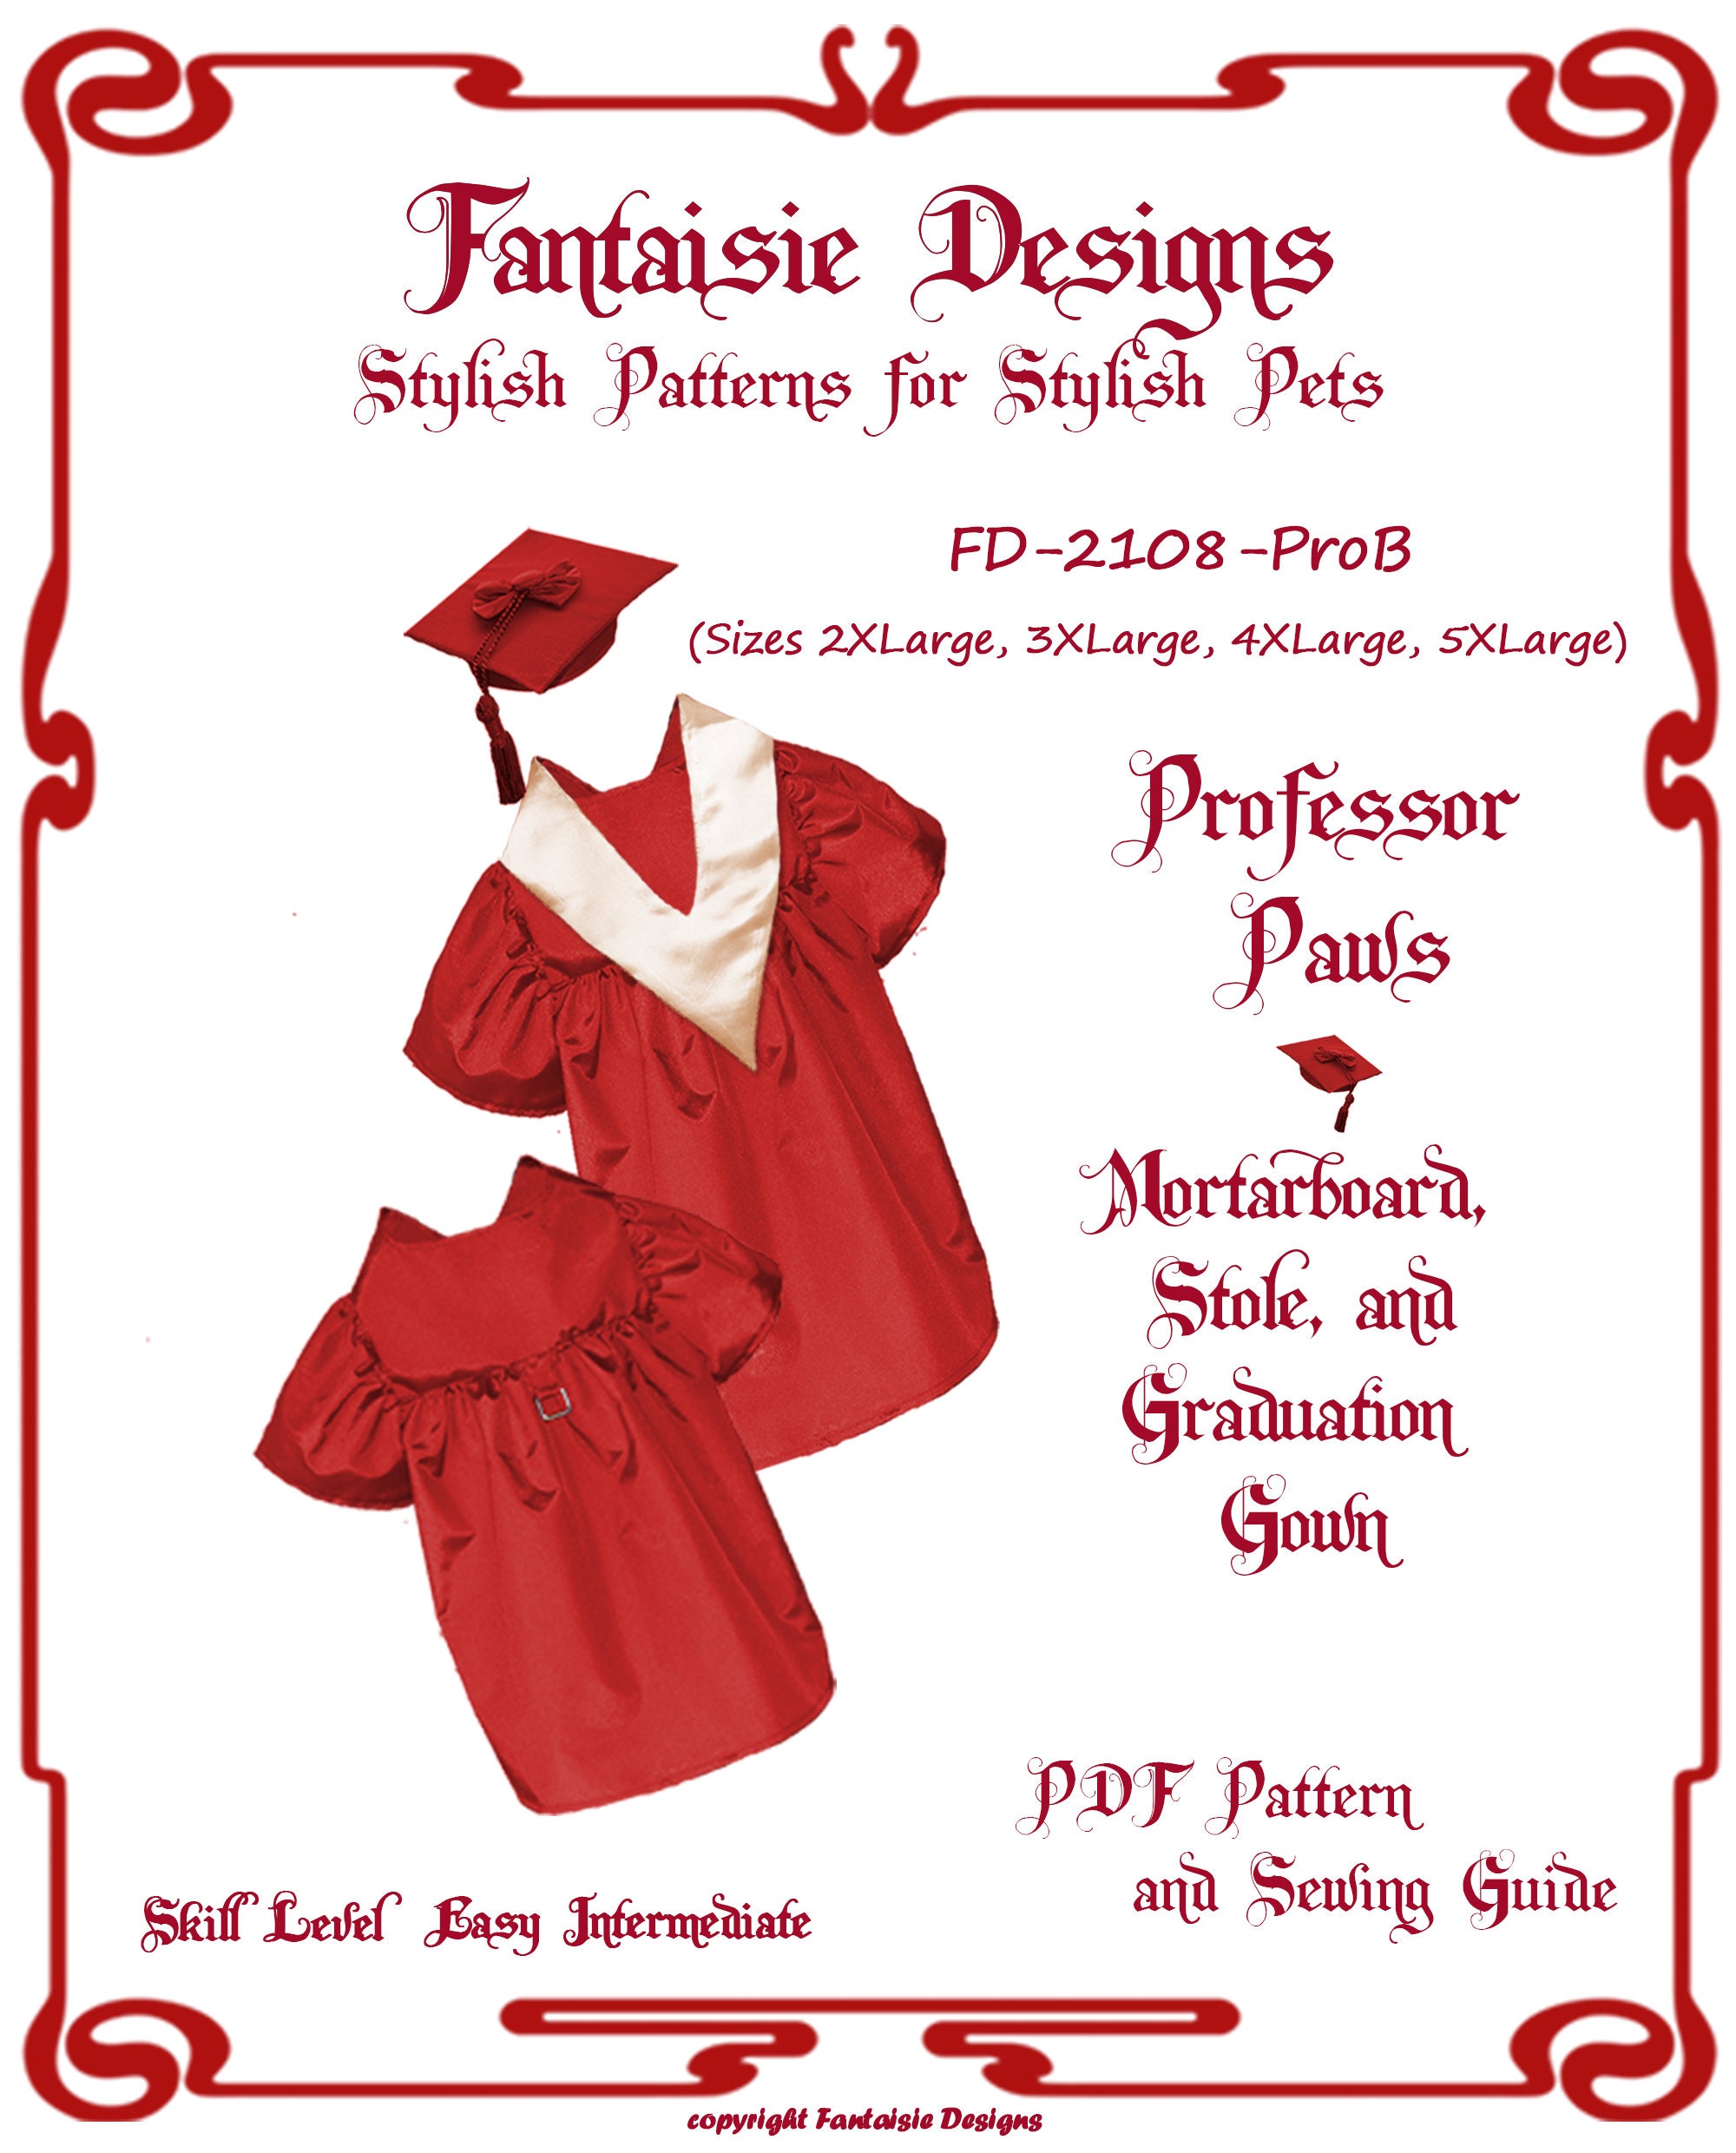 Linda's Blog: My Free Graduation Cap and Gown E-Pattern - For Any 20